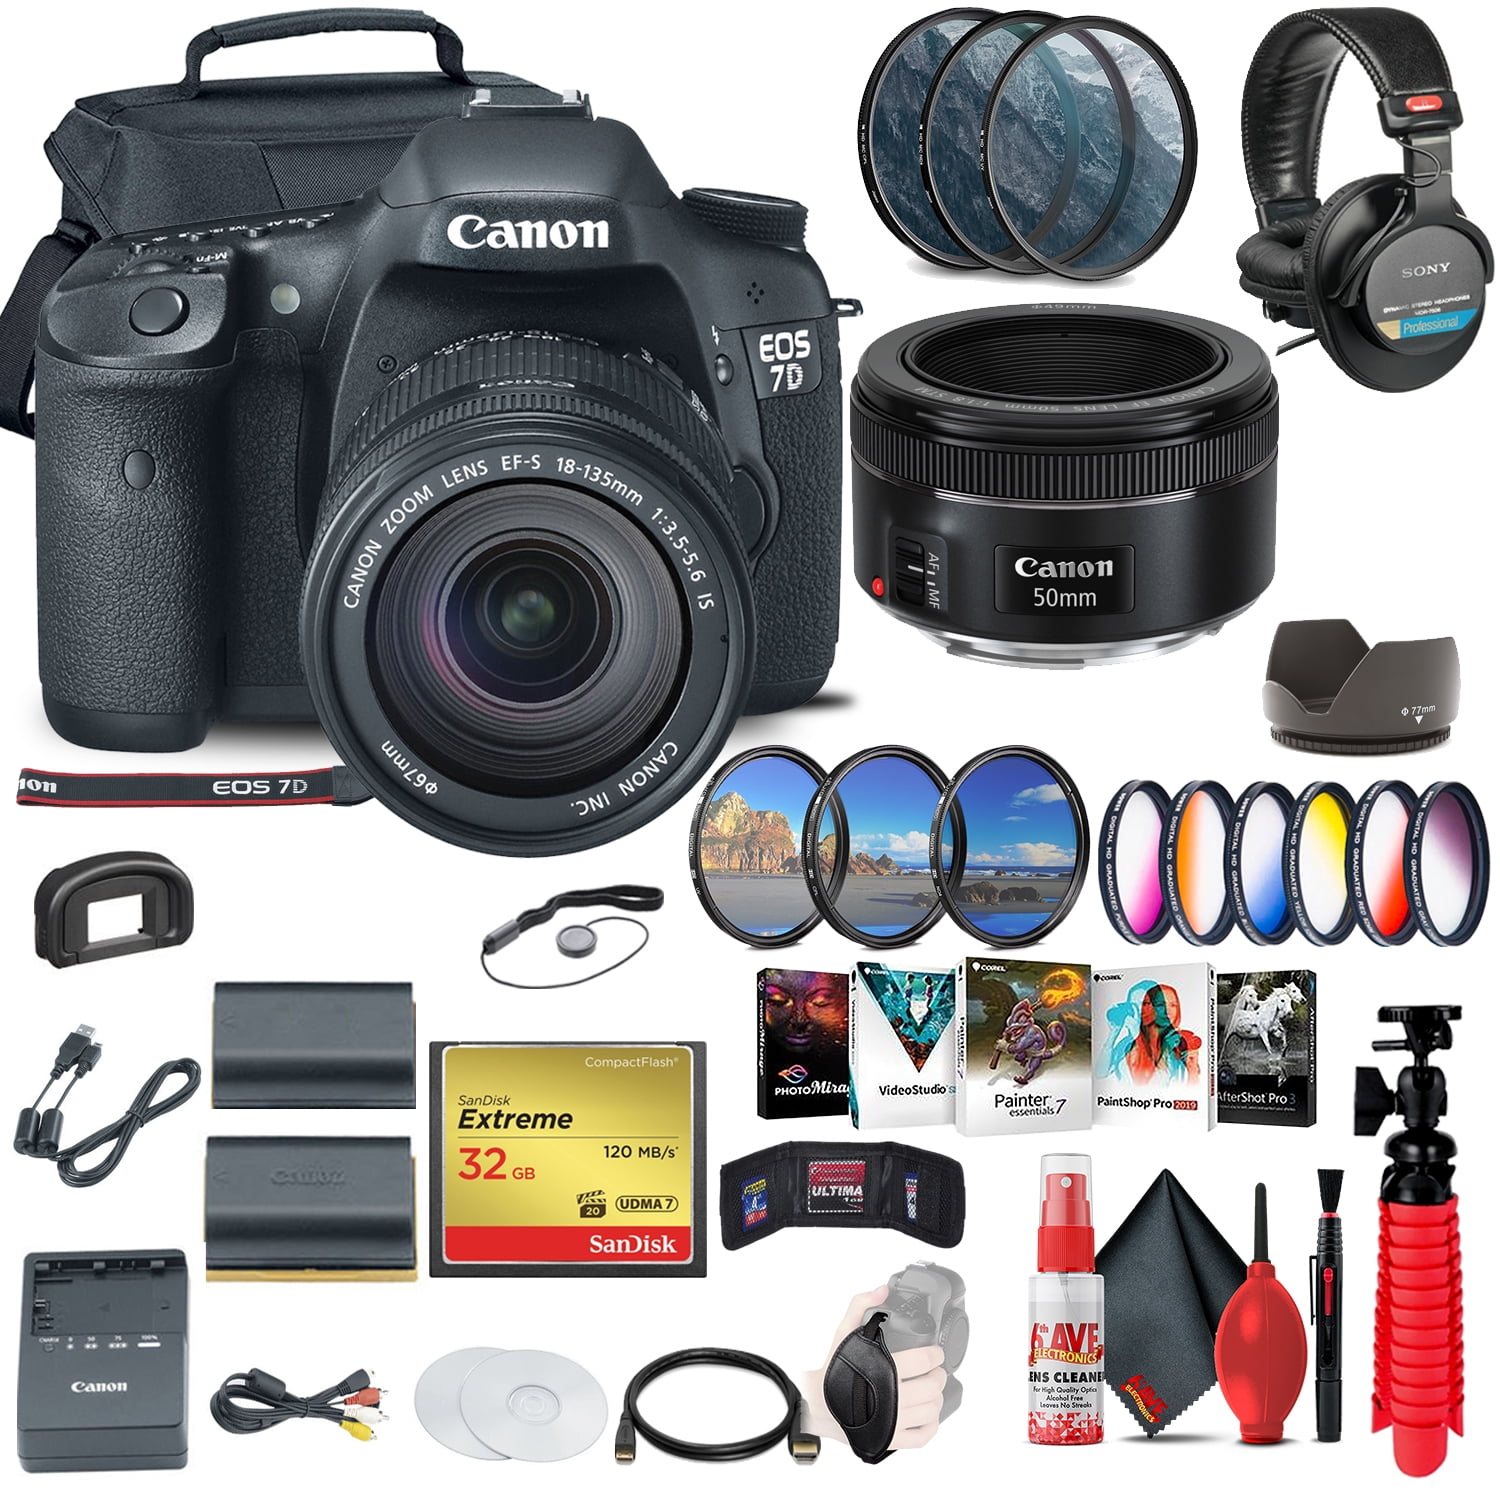 Canon EOS 7D DSLR Camera with 18-135mm Kit (3814B016) + EF 50mm Lens + More